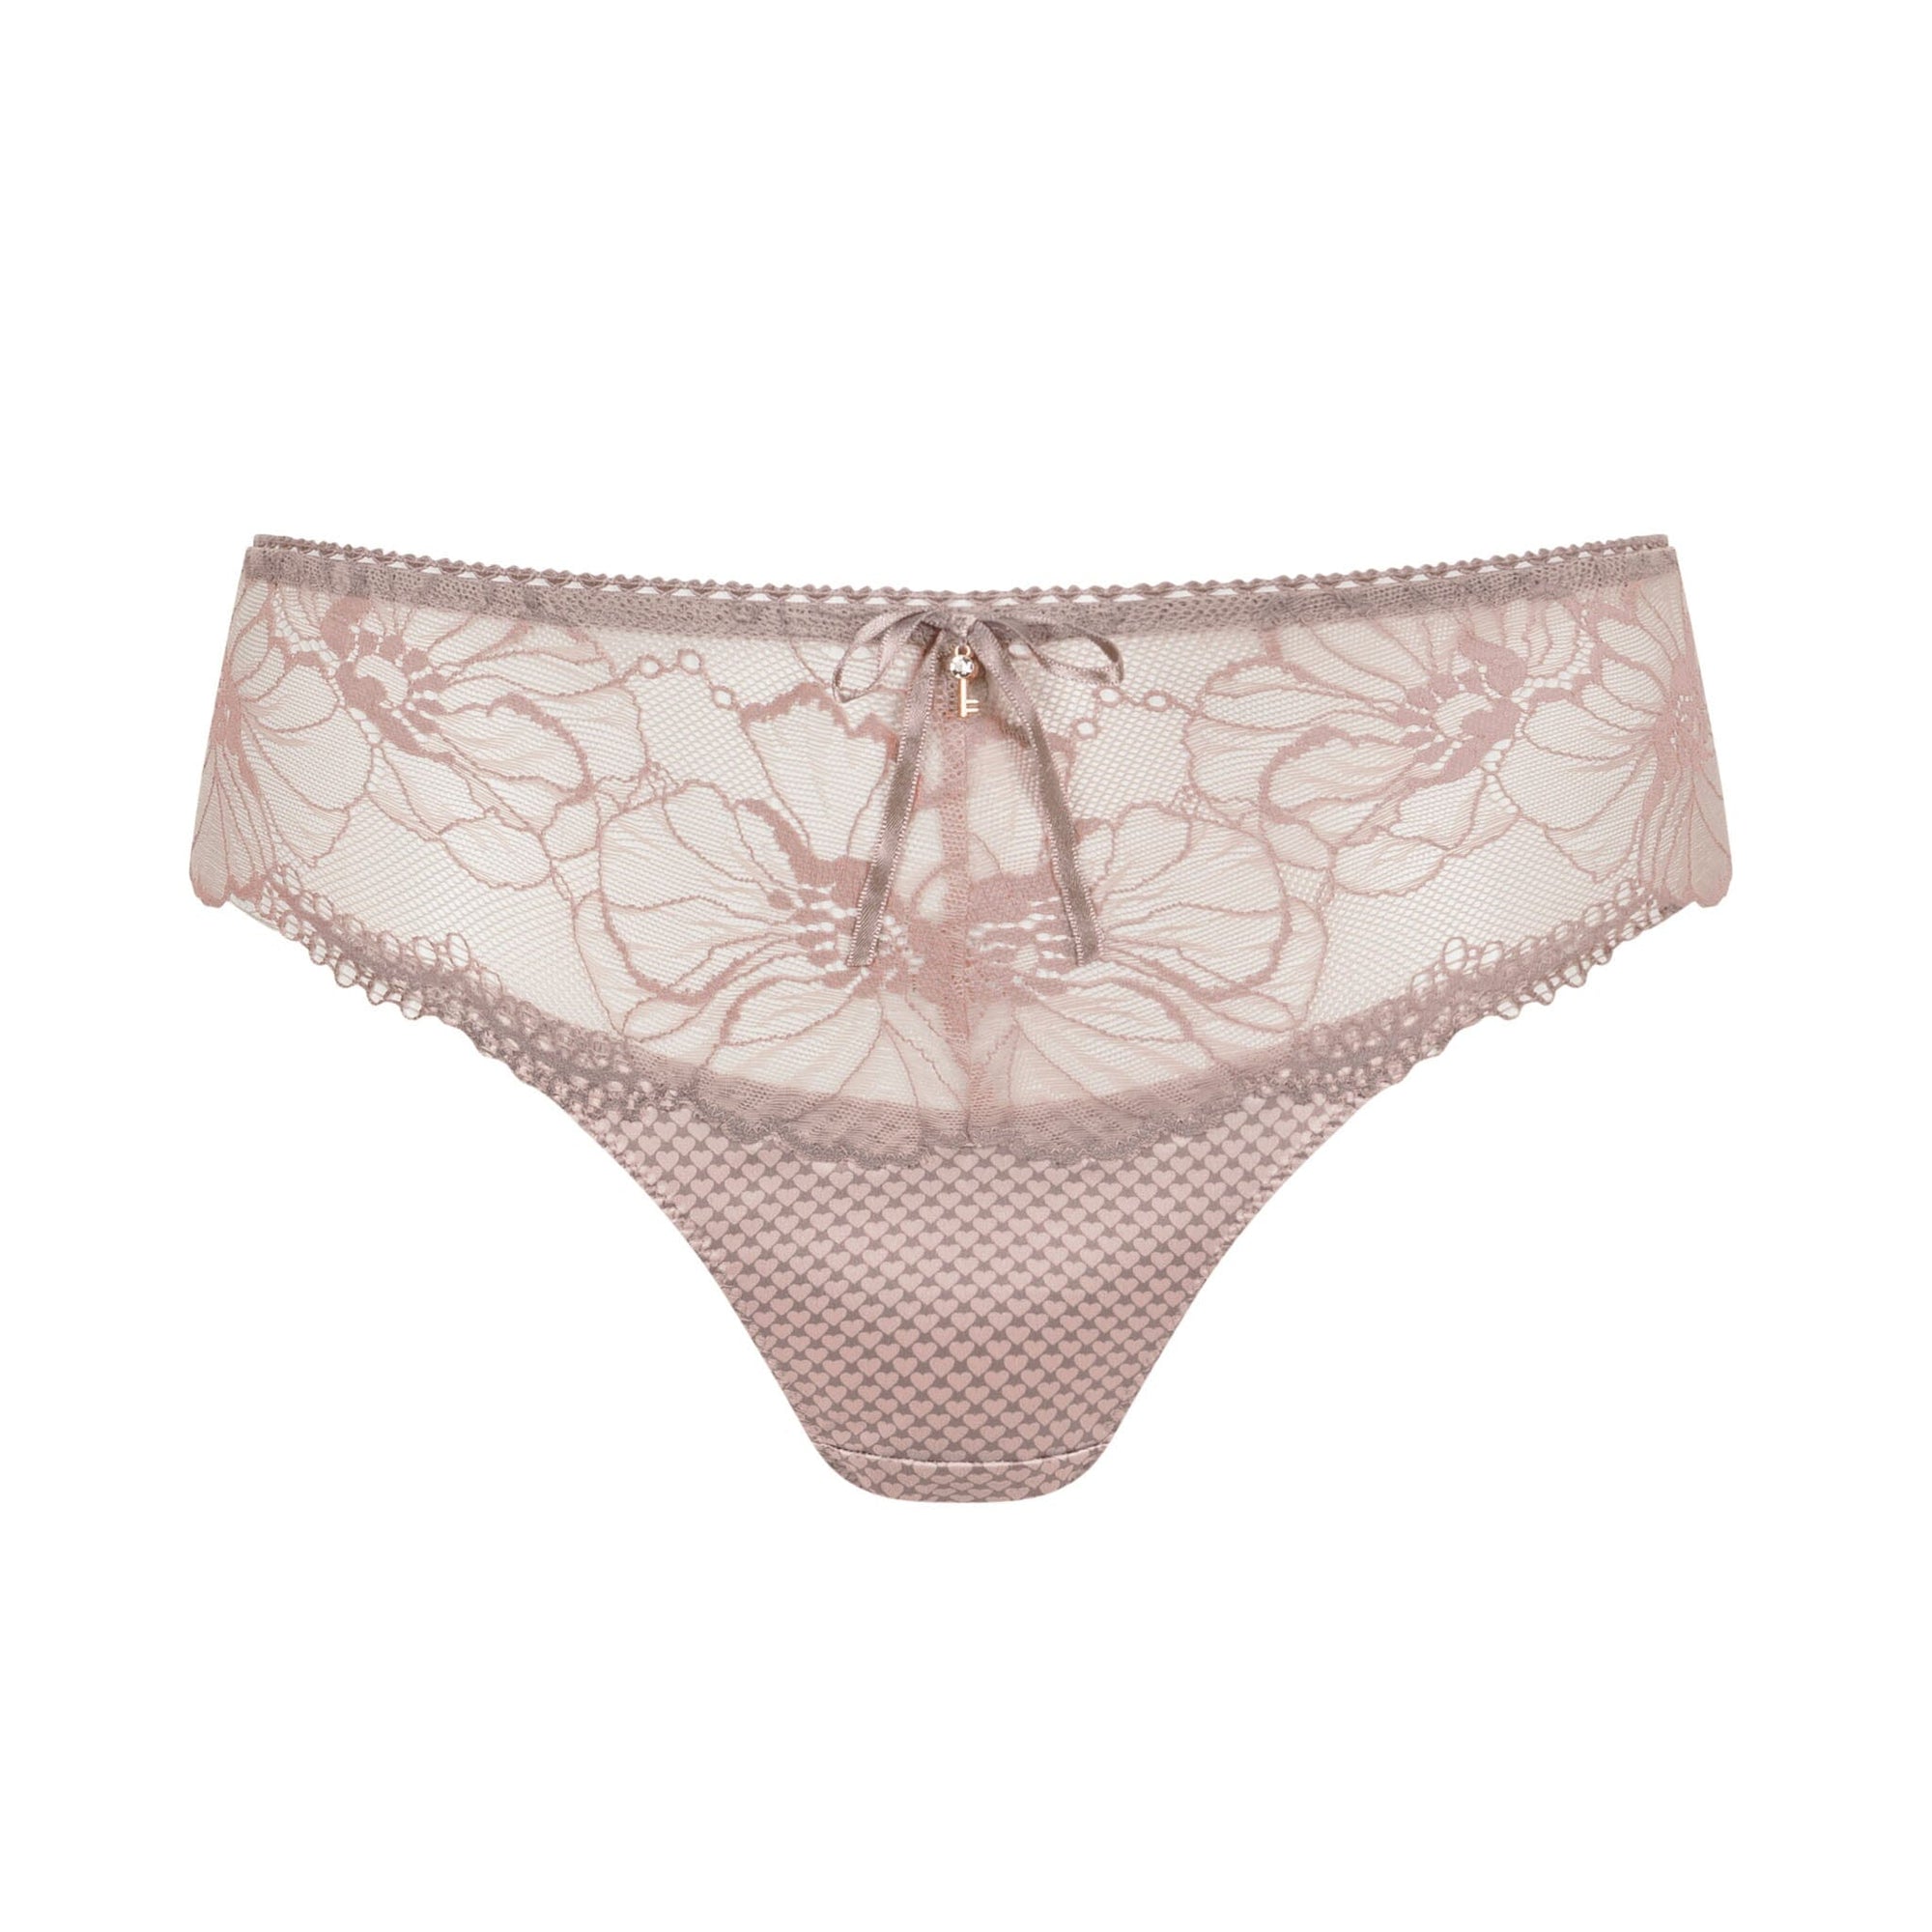 Amoena Be Amazing Hipster Panty Shown in Tender Taupe/Rose Kiss